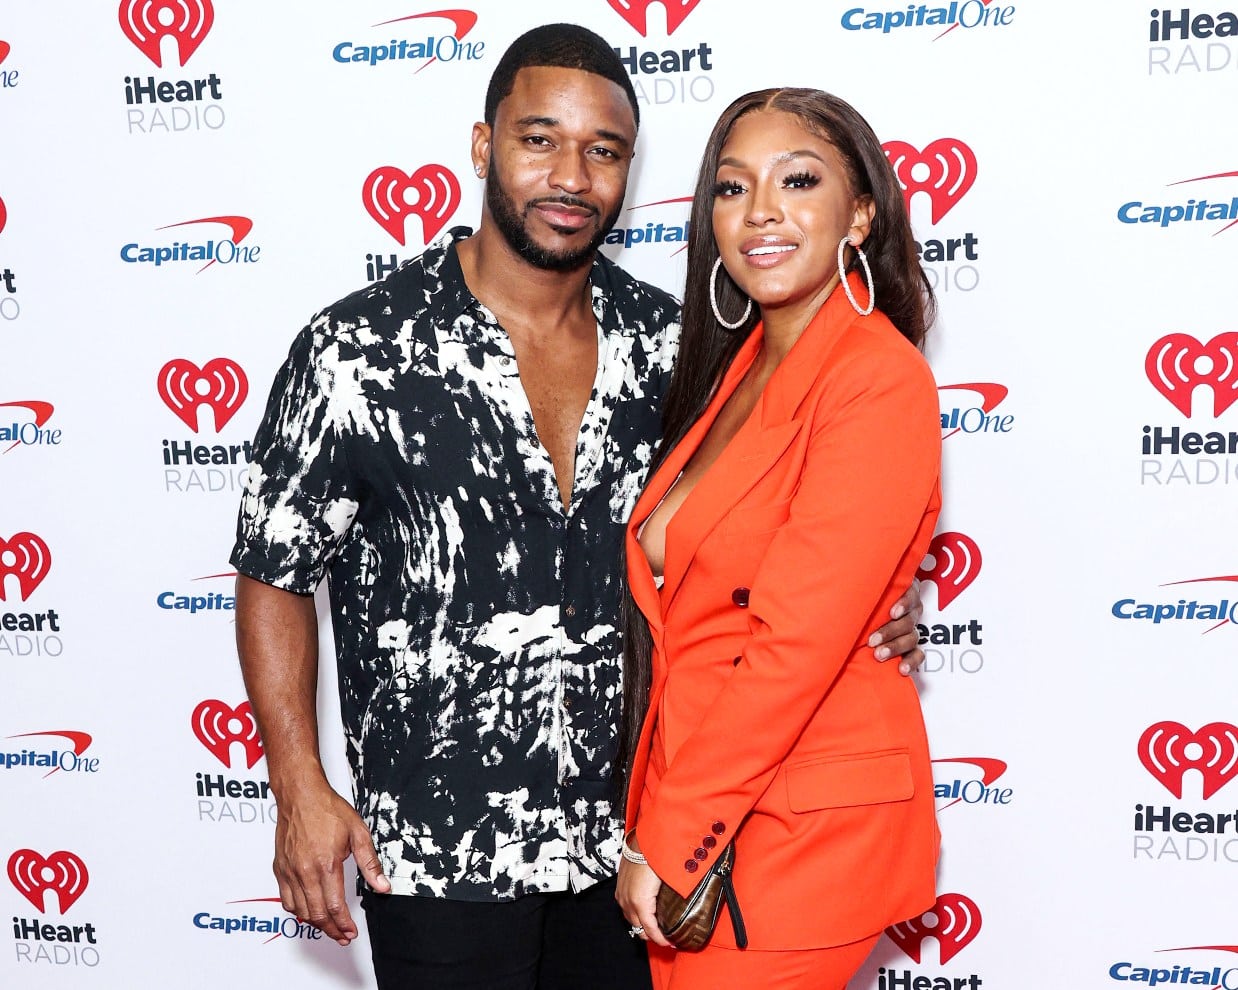 RHOA's Drew Sidora Claims Ralph is Source of TY Romance Rumors as Marlo Wonders If She & Ralph Had "Open Relationship," Plus Sheree and Sanya Weigh in, and Live Viewing